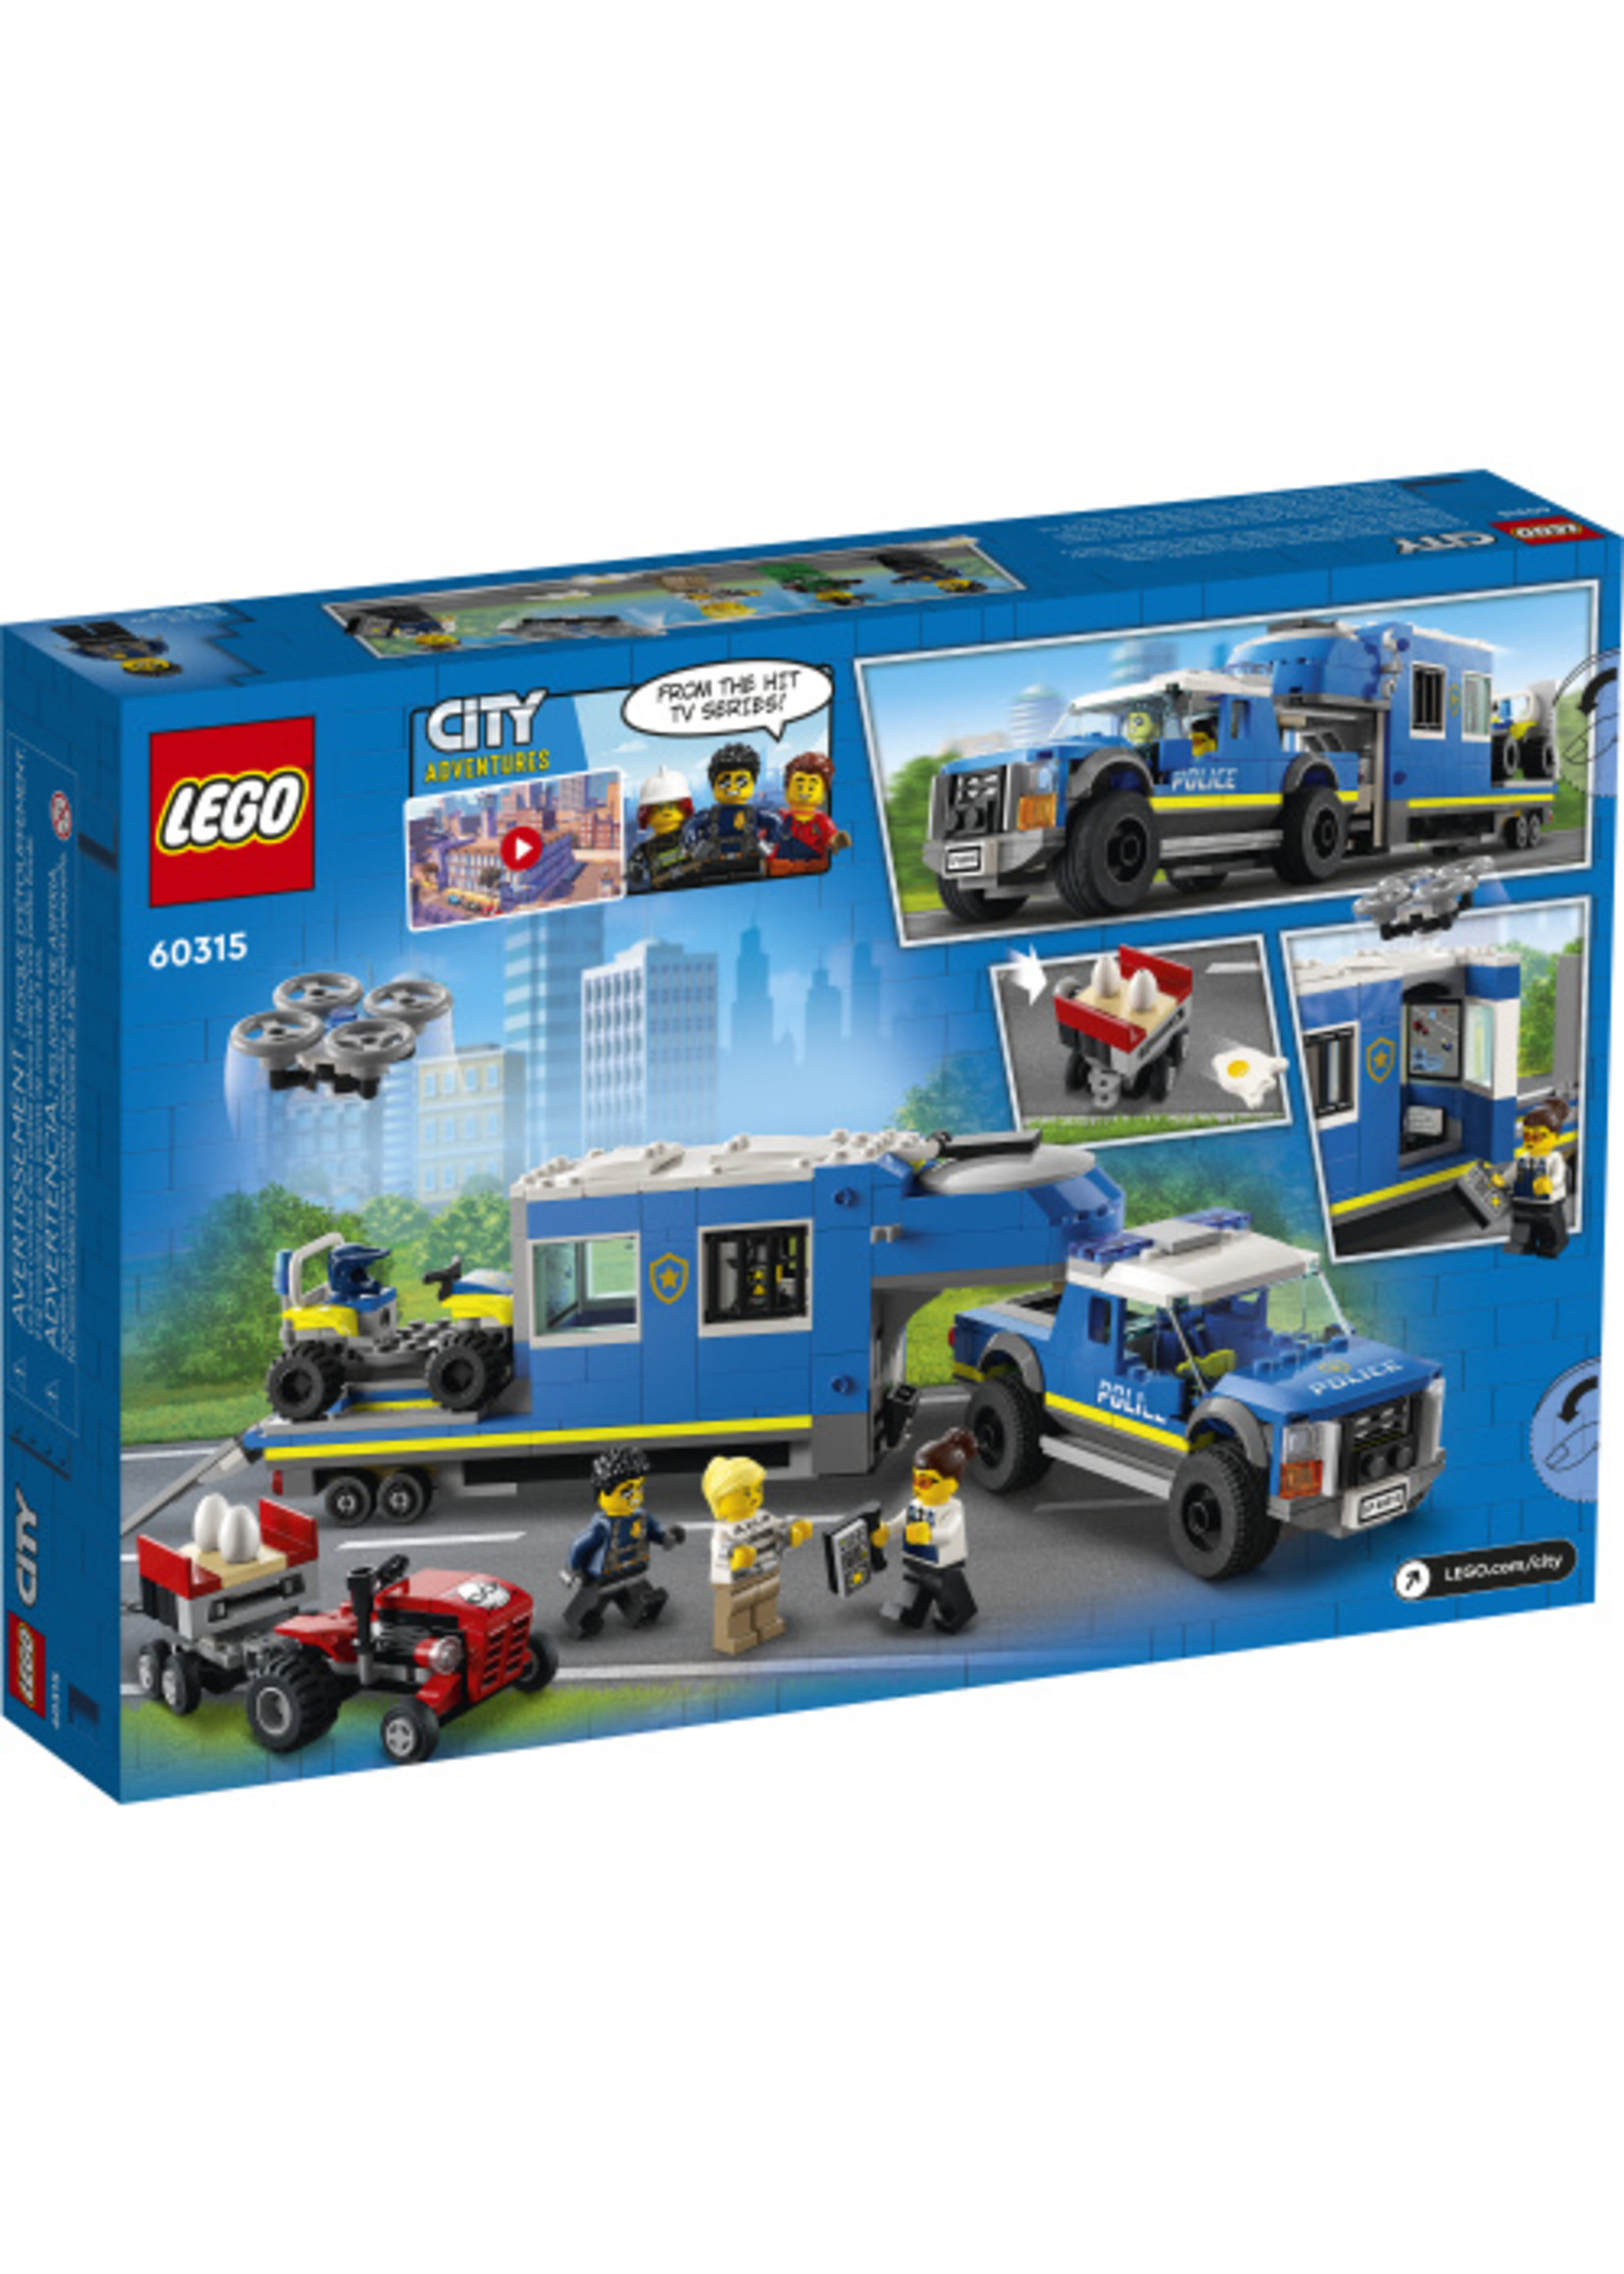 LEGO 60315 - Police Mobile Command Truck